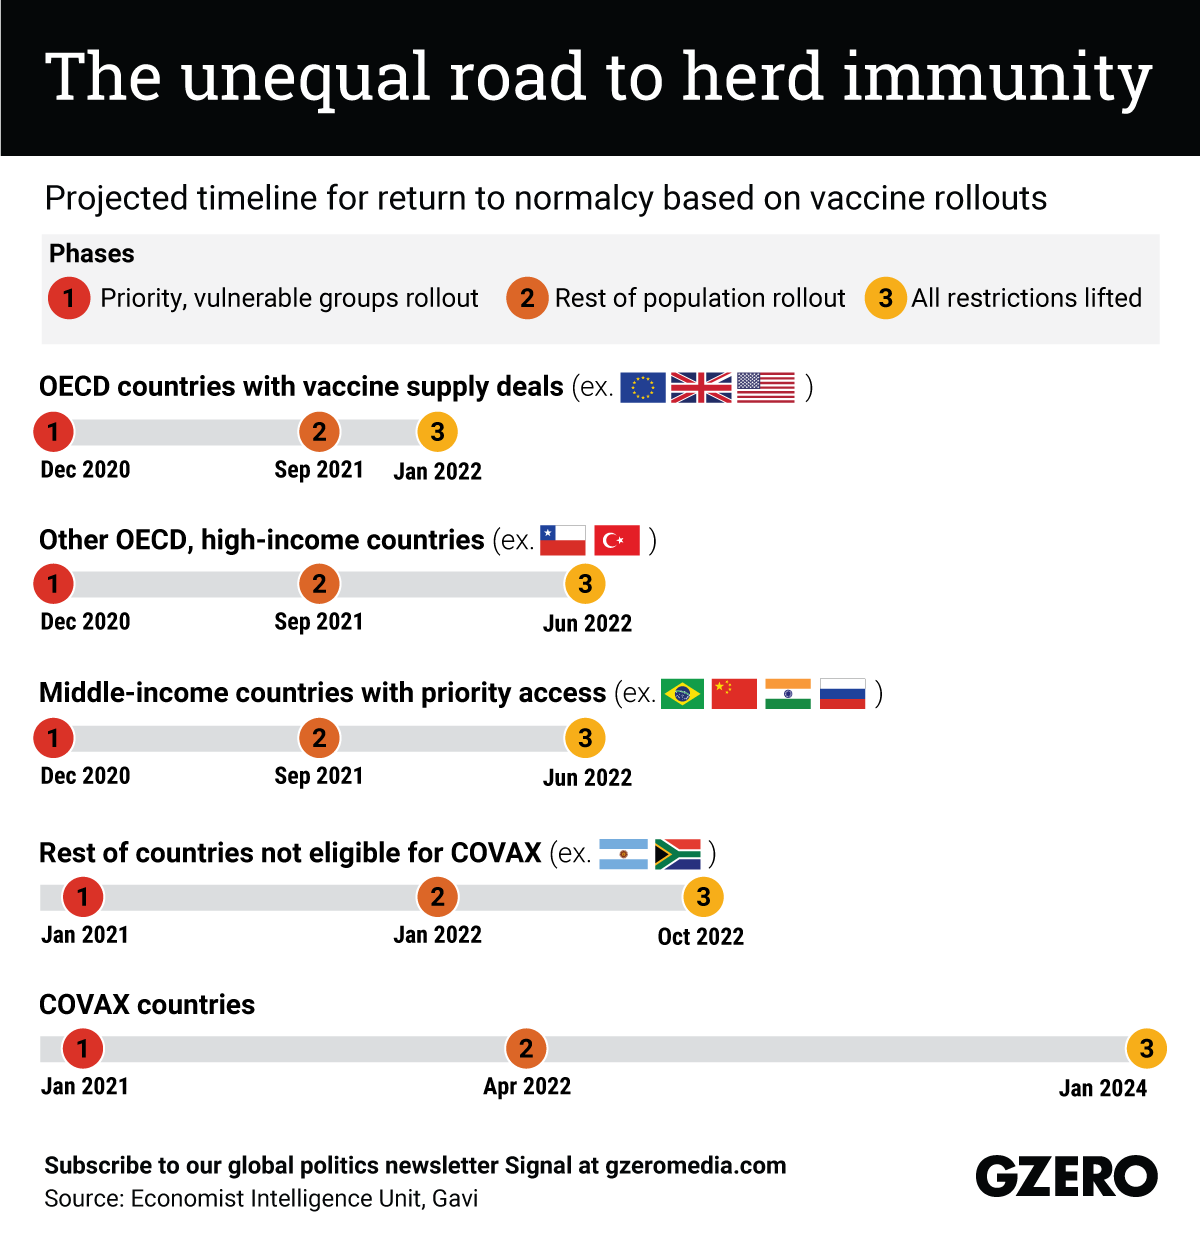 The unequal road to herd immunity